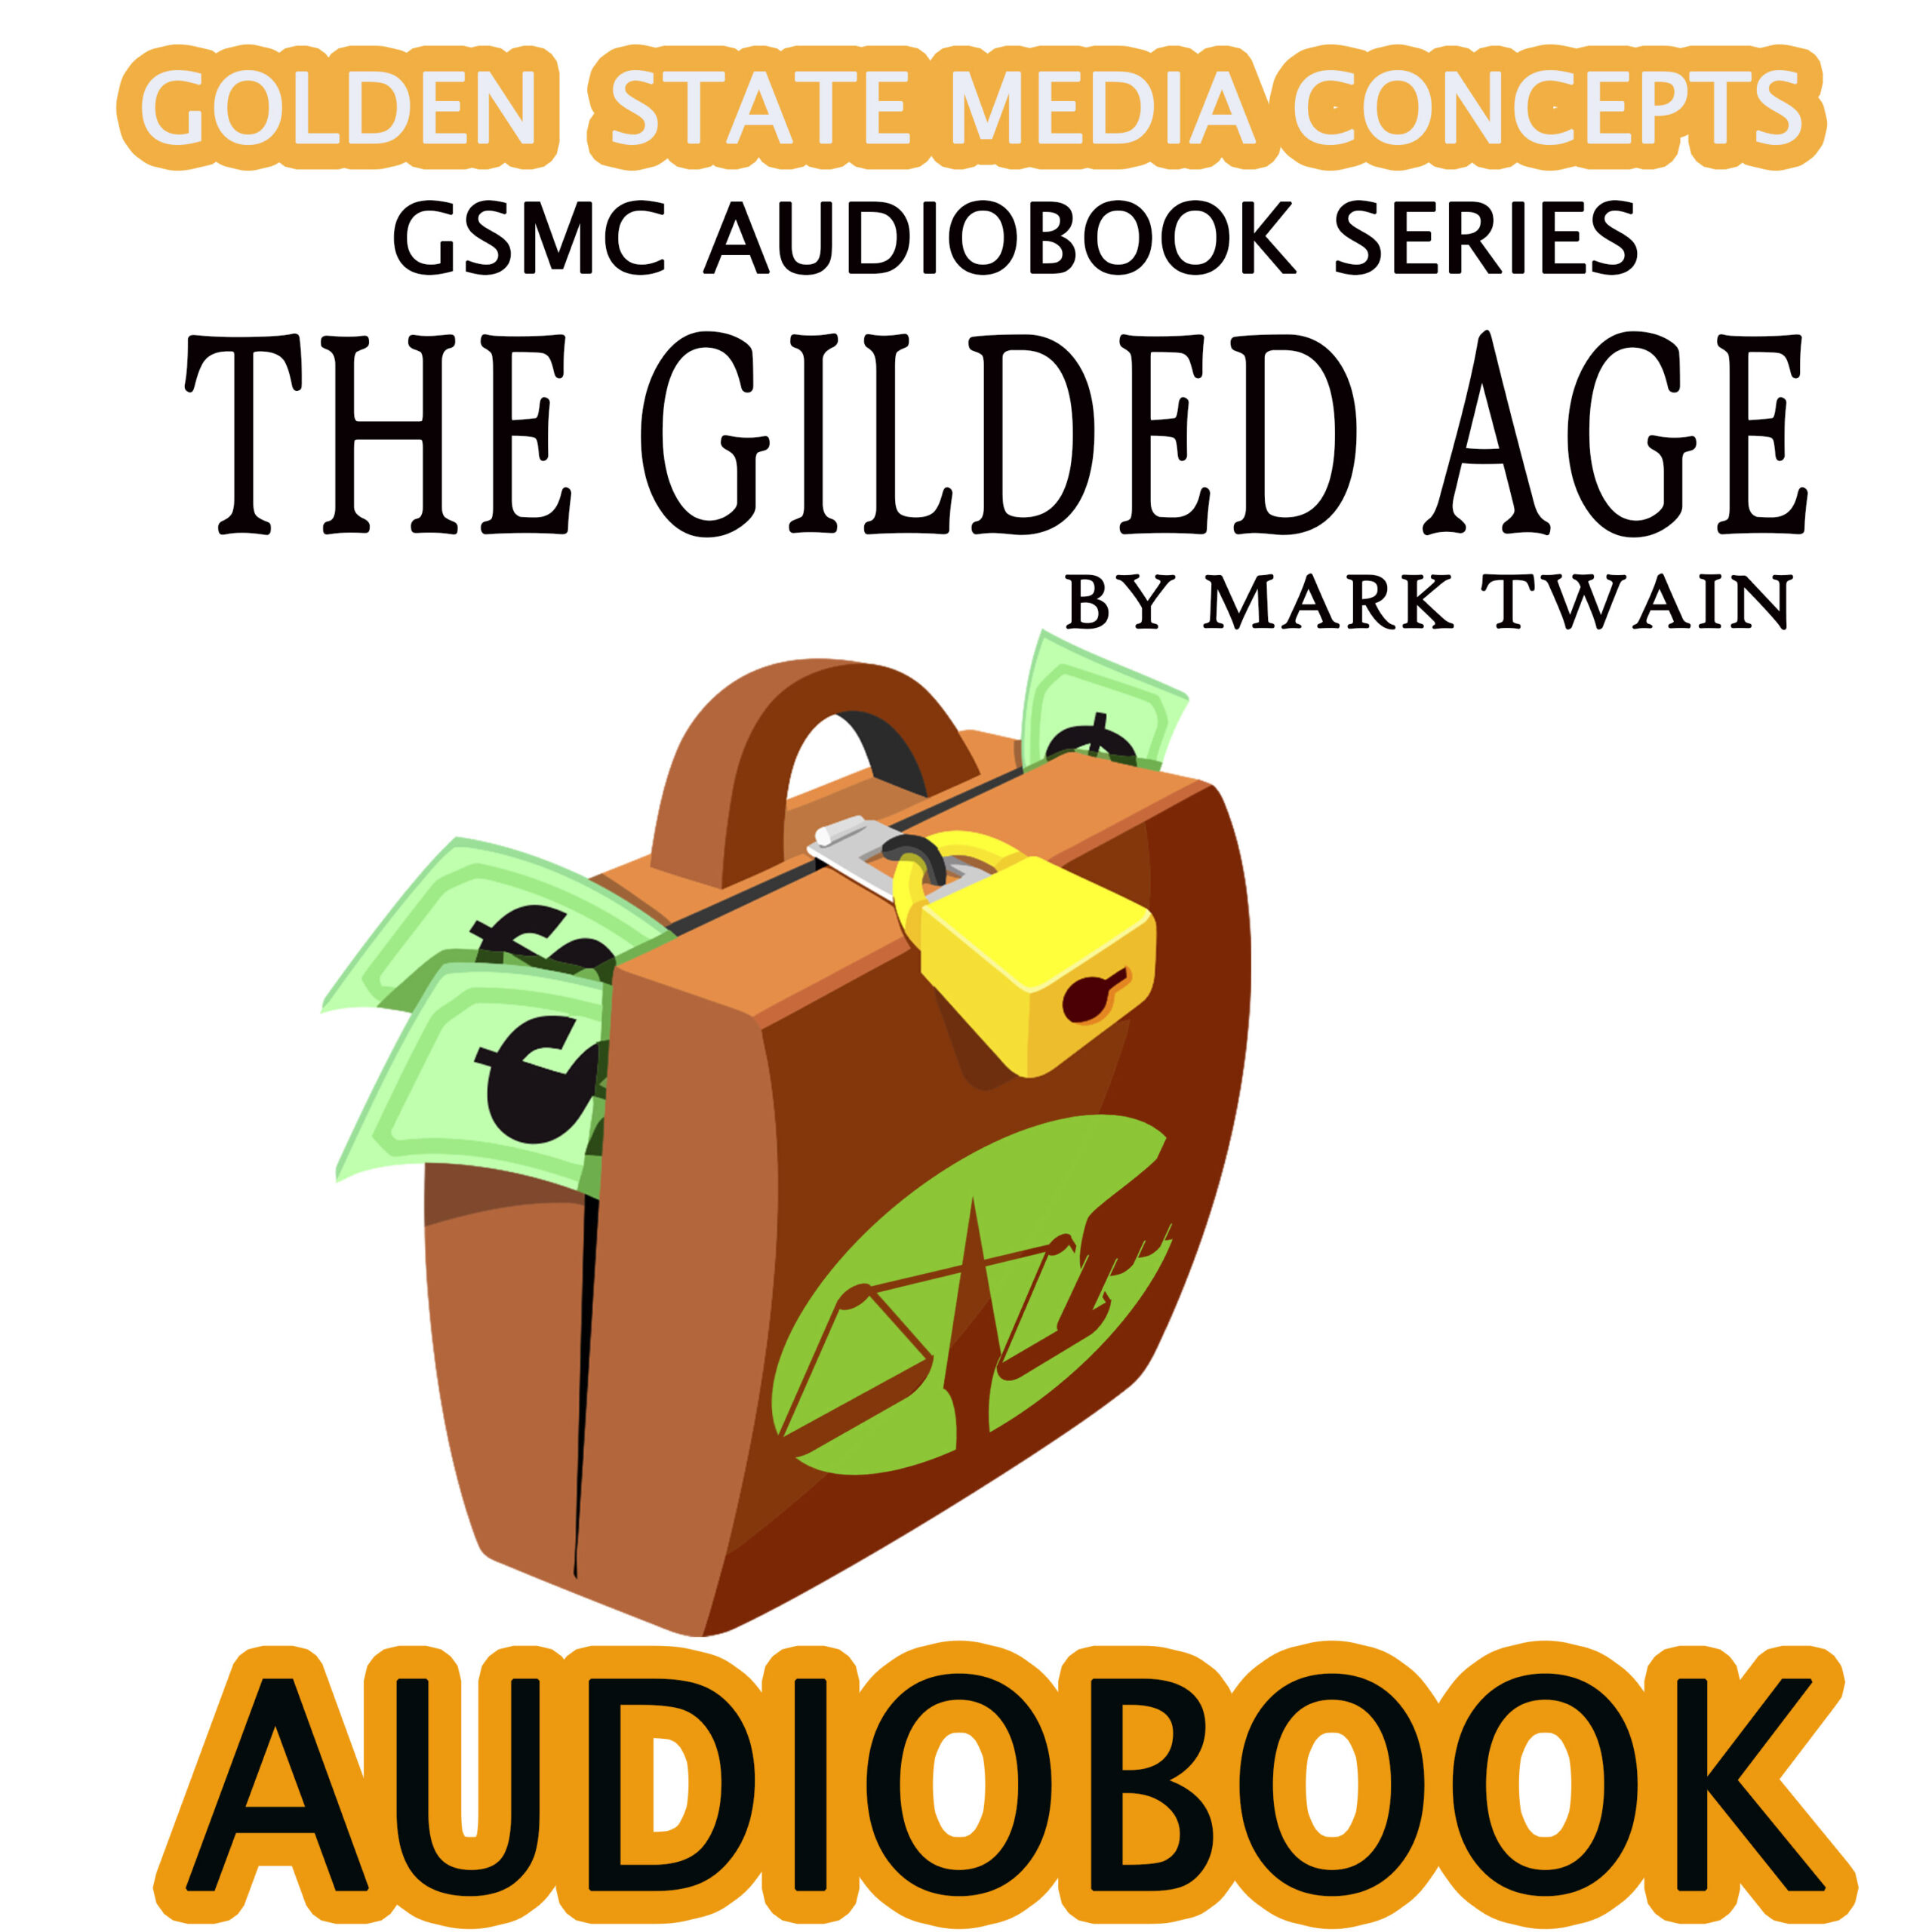 GSMC Audiobook Series: The Gilded Age a Tale of Today by Mark Twain